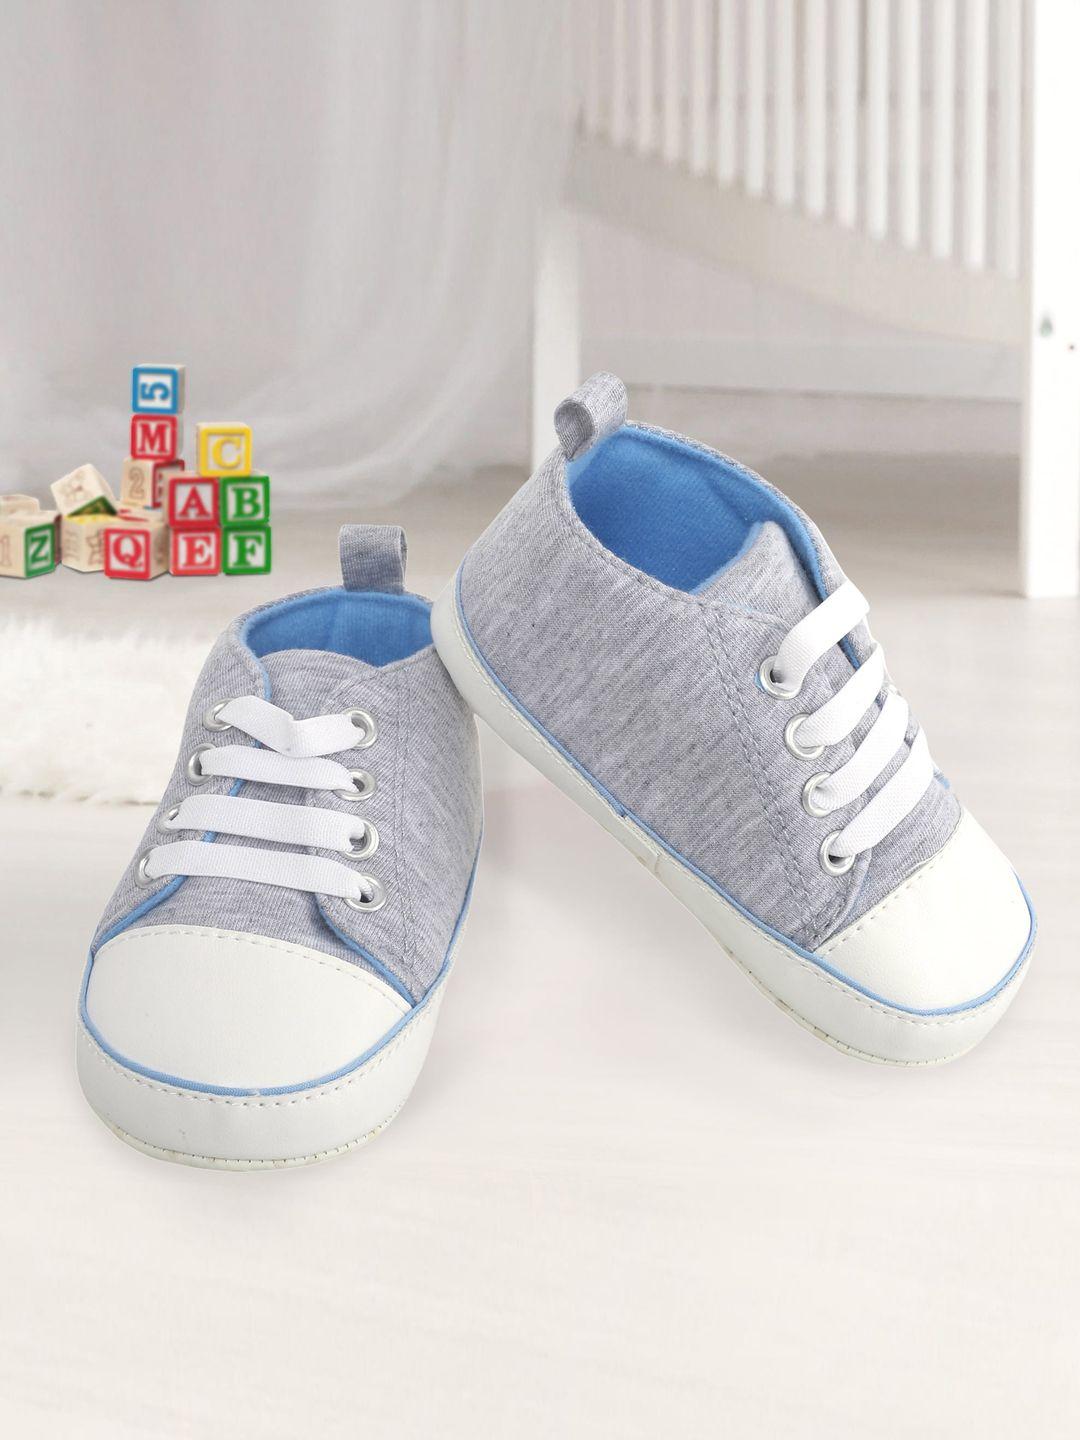 baby moo kids grey lace up booties